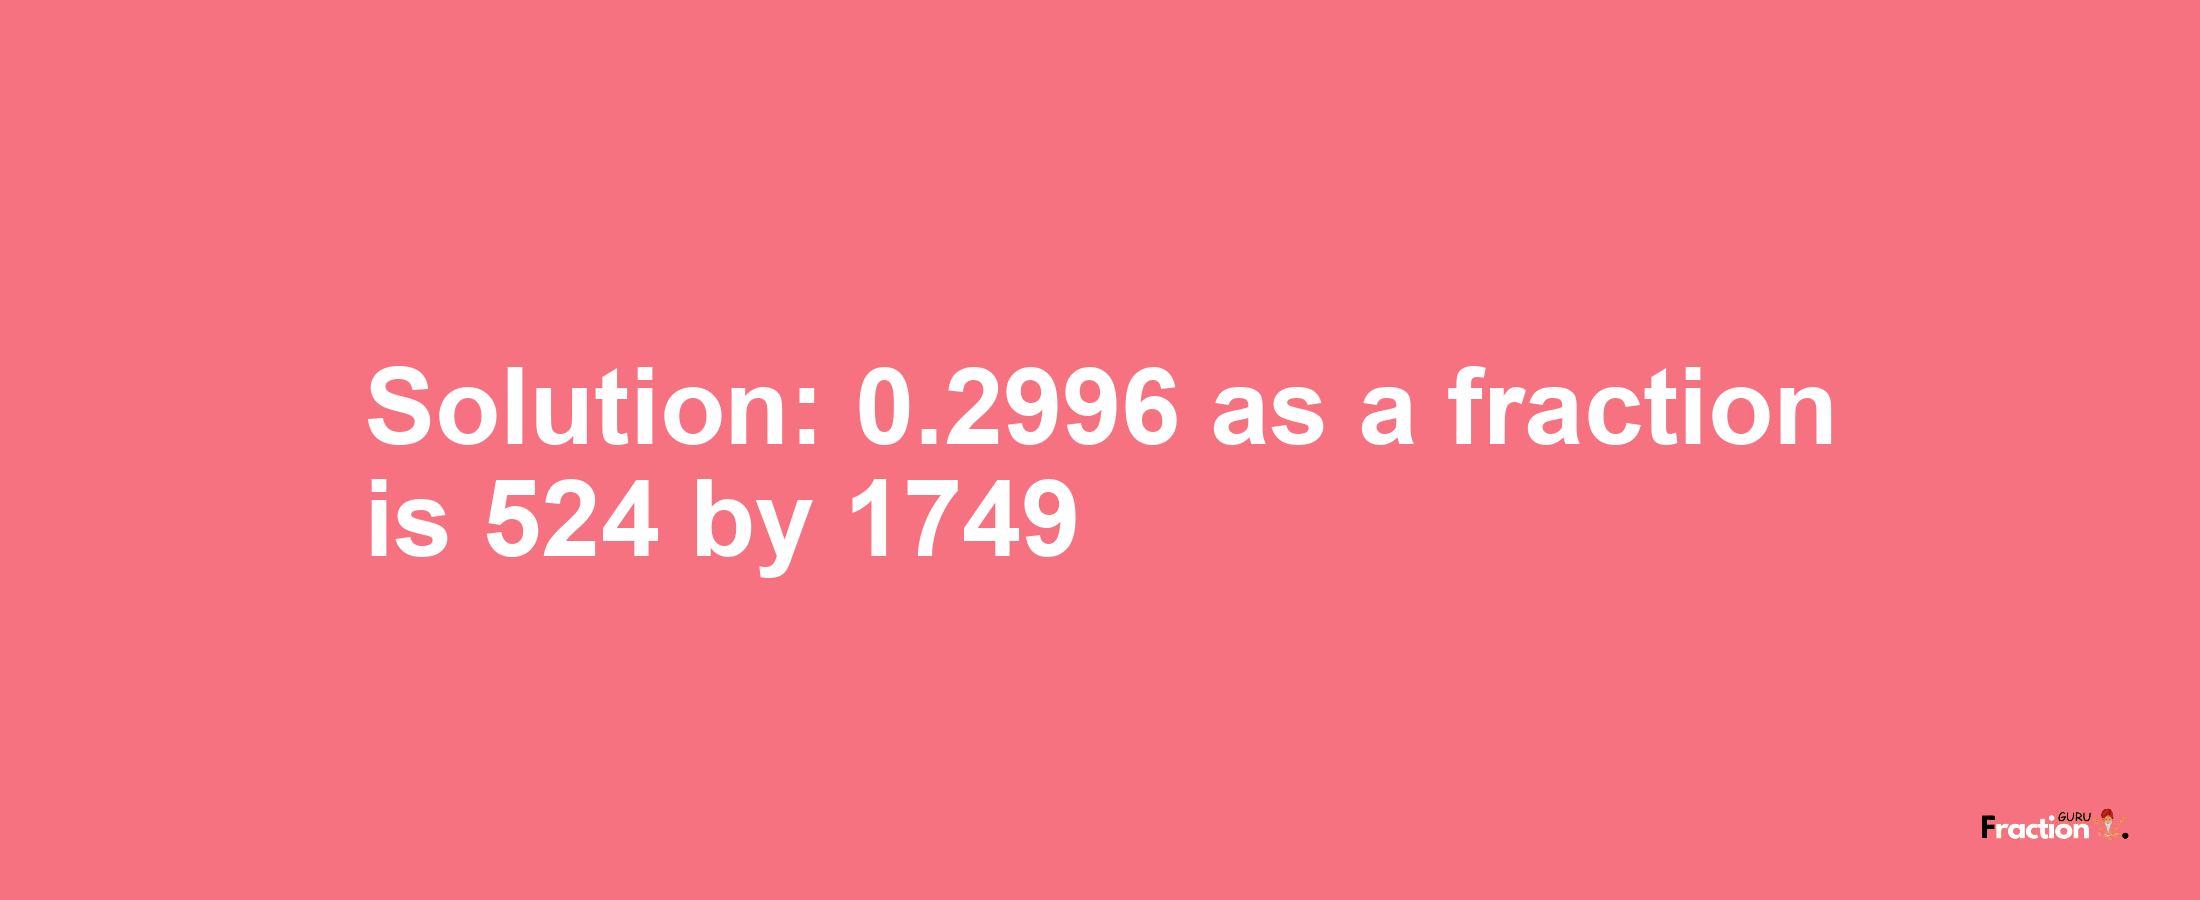 Solution:0.2996 as a fraction is 524/1749